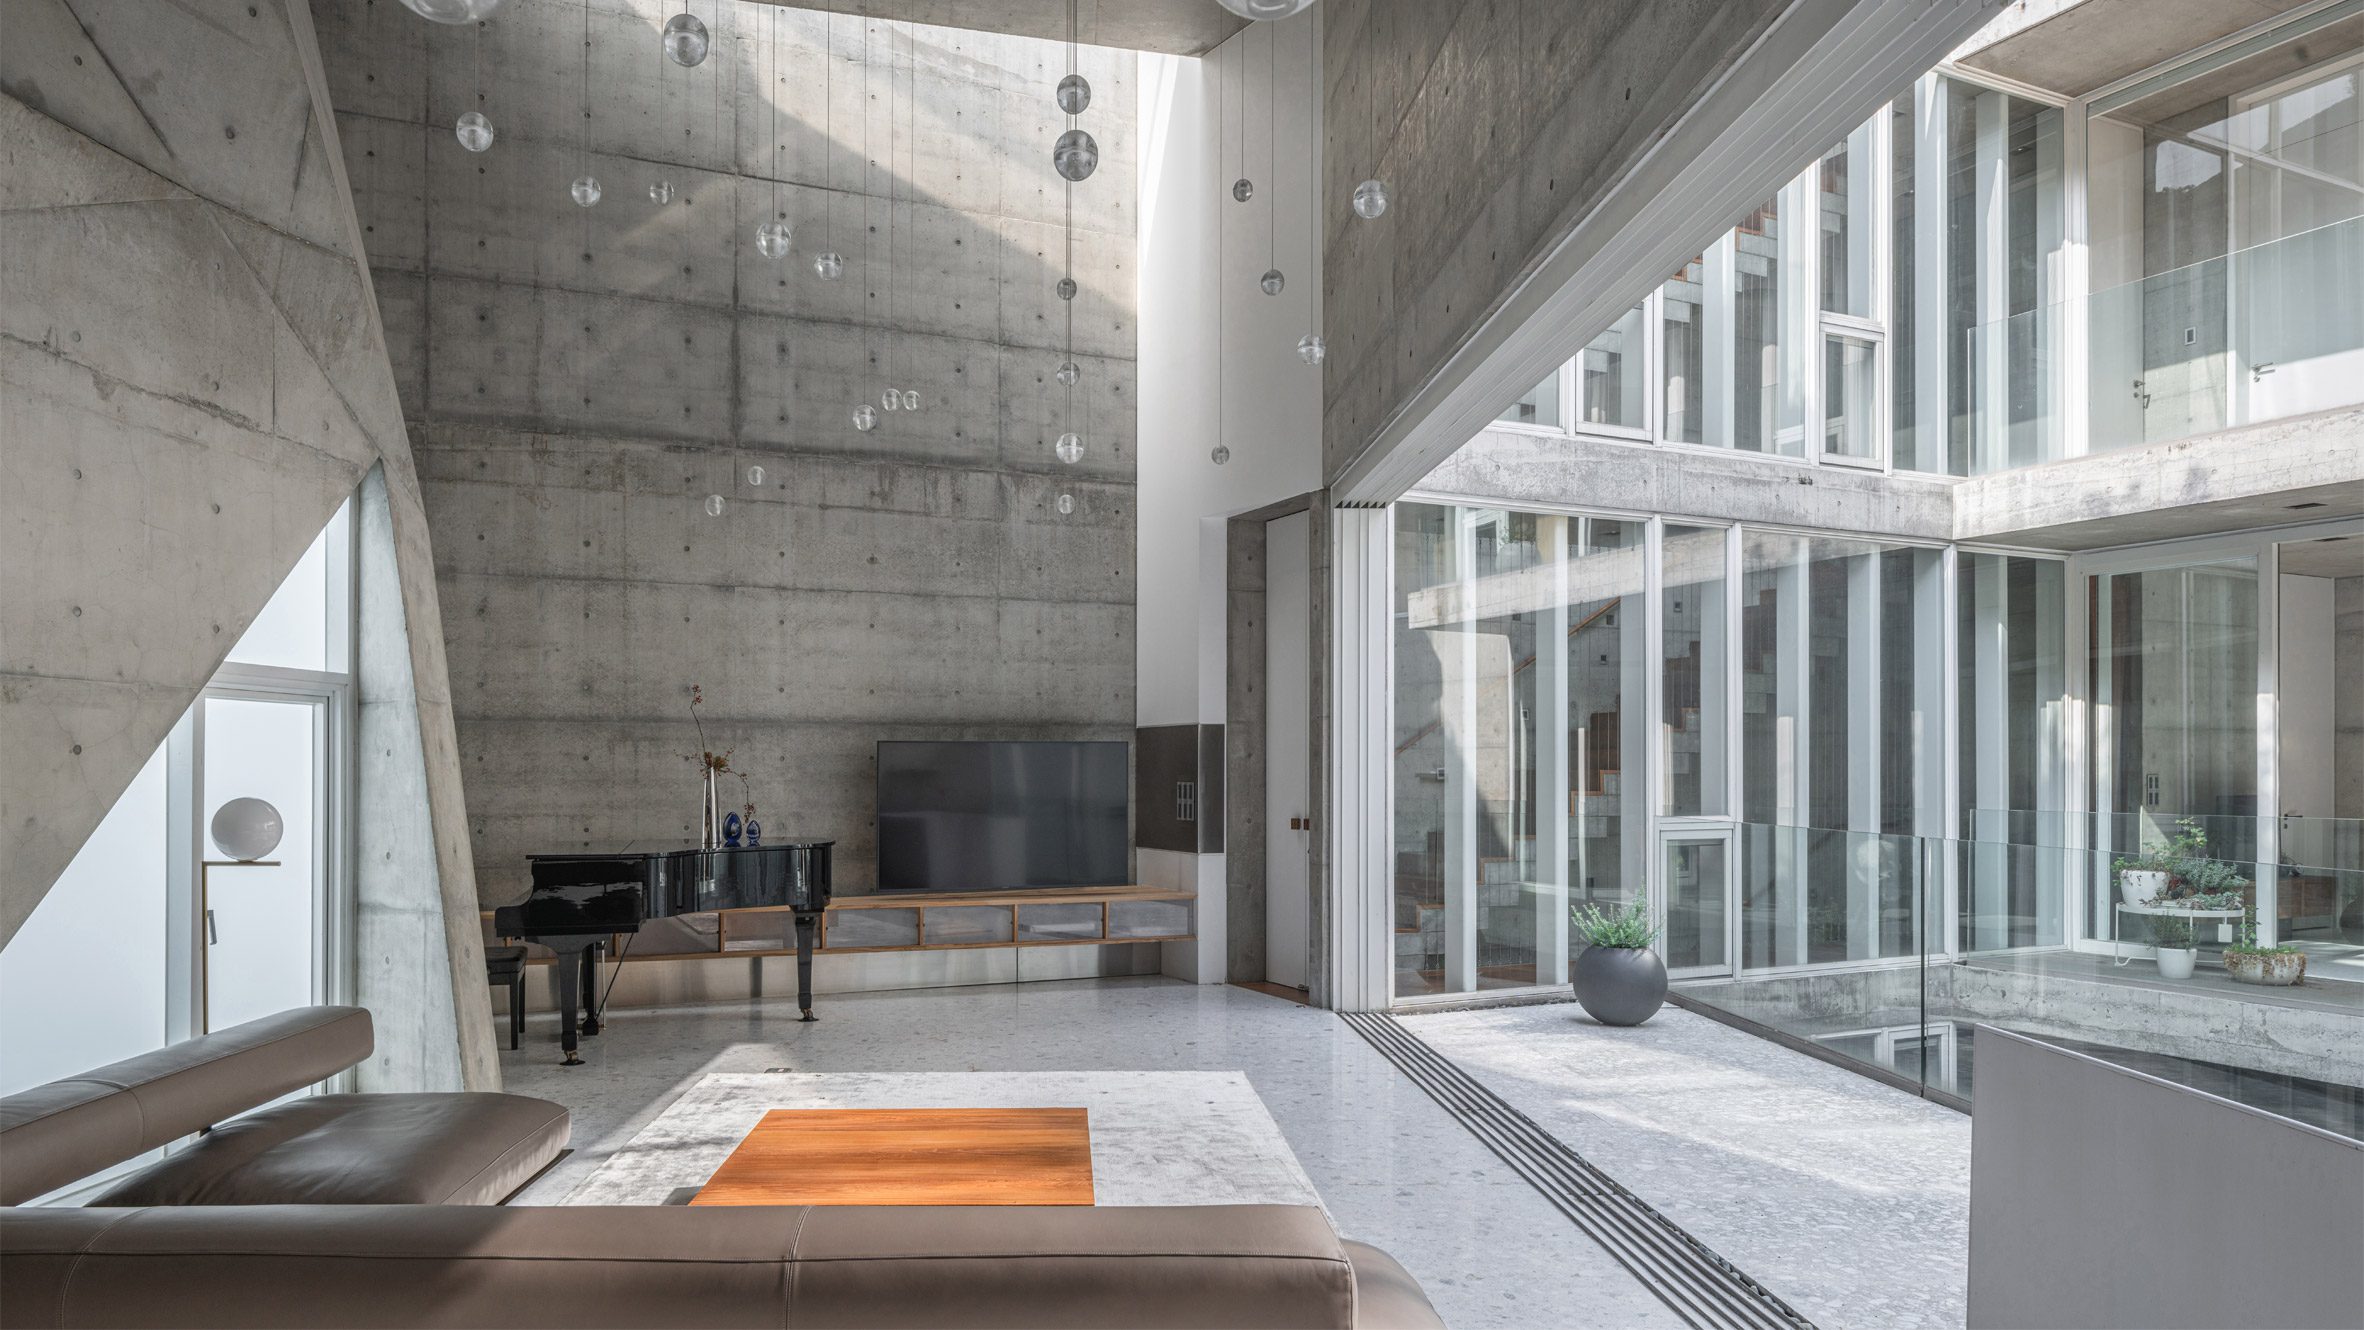 Concrete living space with lofty ceiling and large opening leading to a balcony overlooking a courtyard